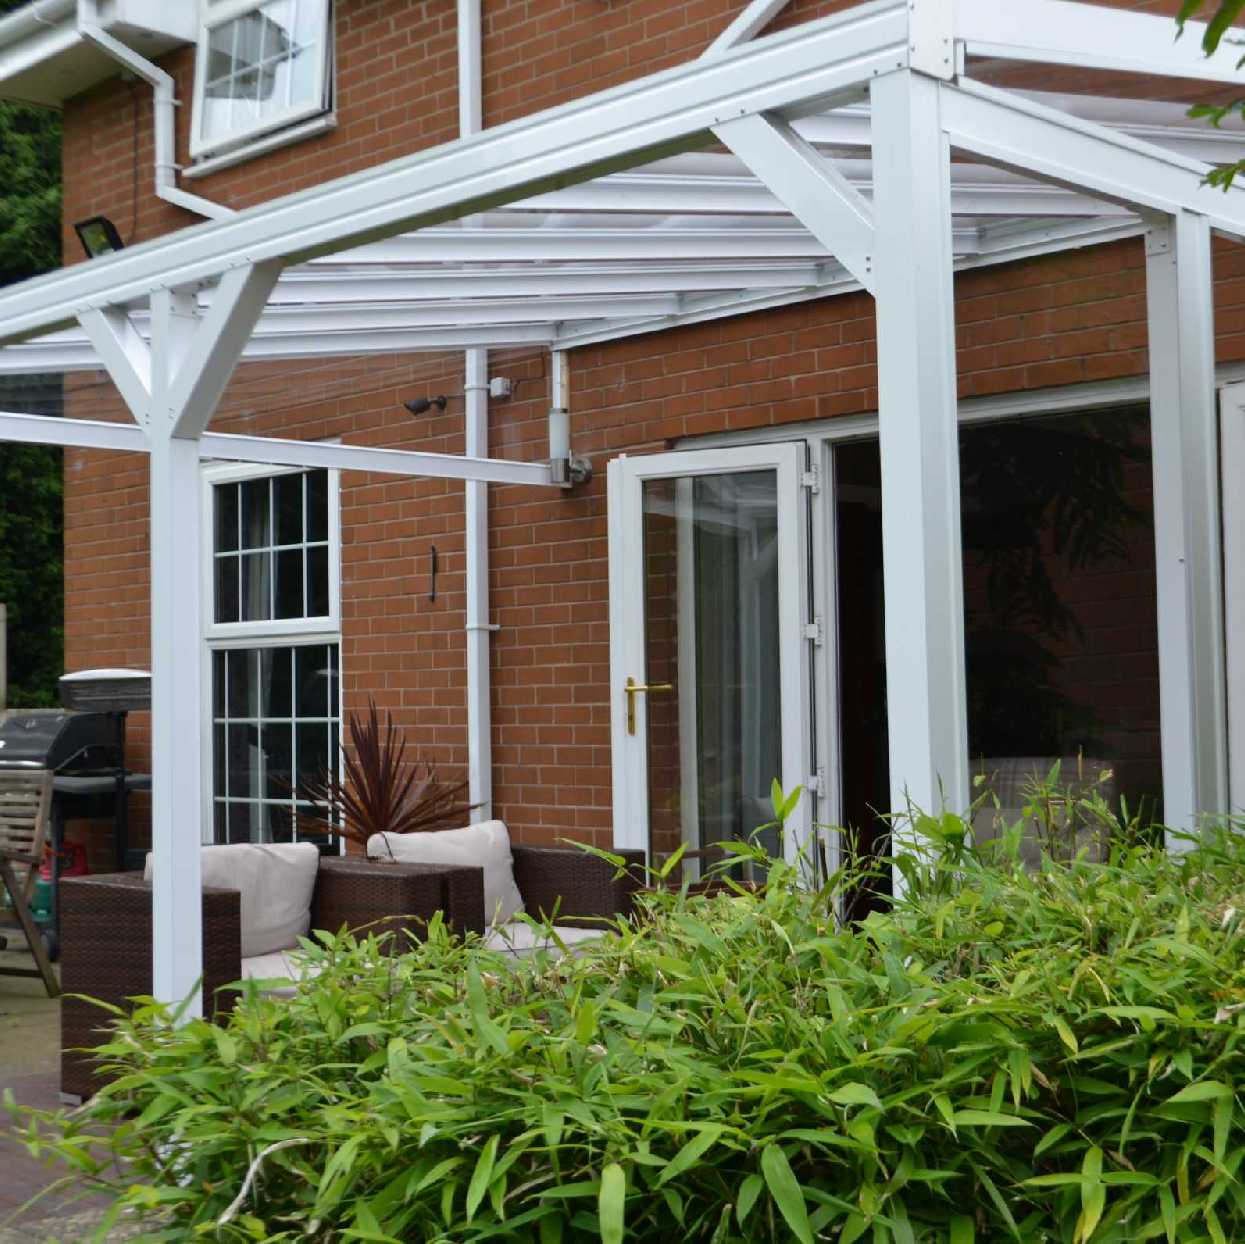 Omega Smart Lean-To Canopy, White with 6mm Glass Clear Plate Polycarbonate Glazing - 5.6m (W) x 3.5m (P), (3) Supporting Posts from Omega Build